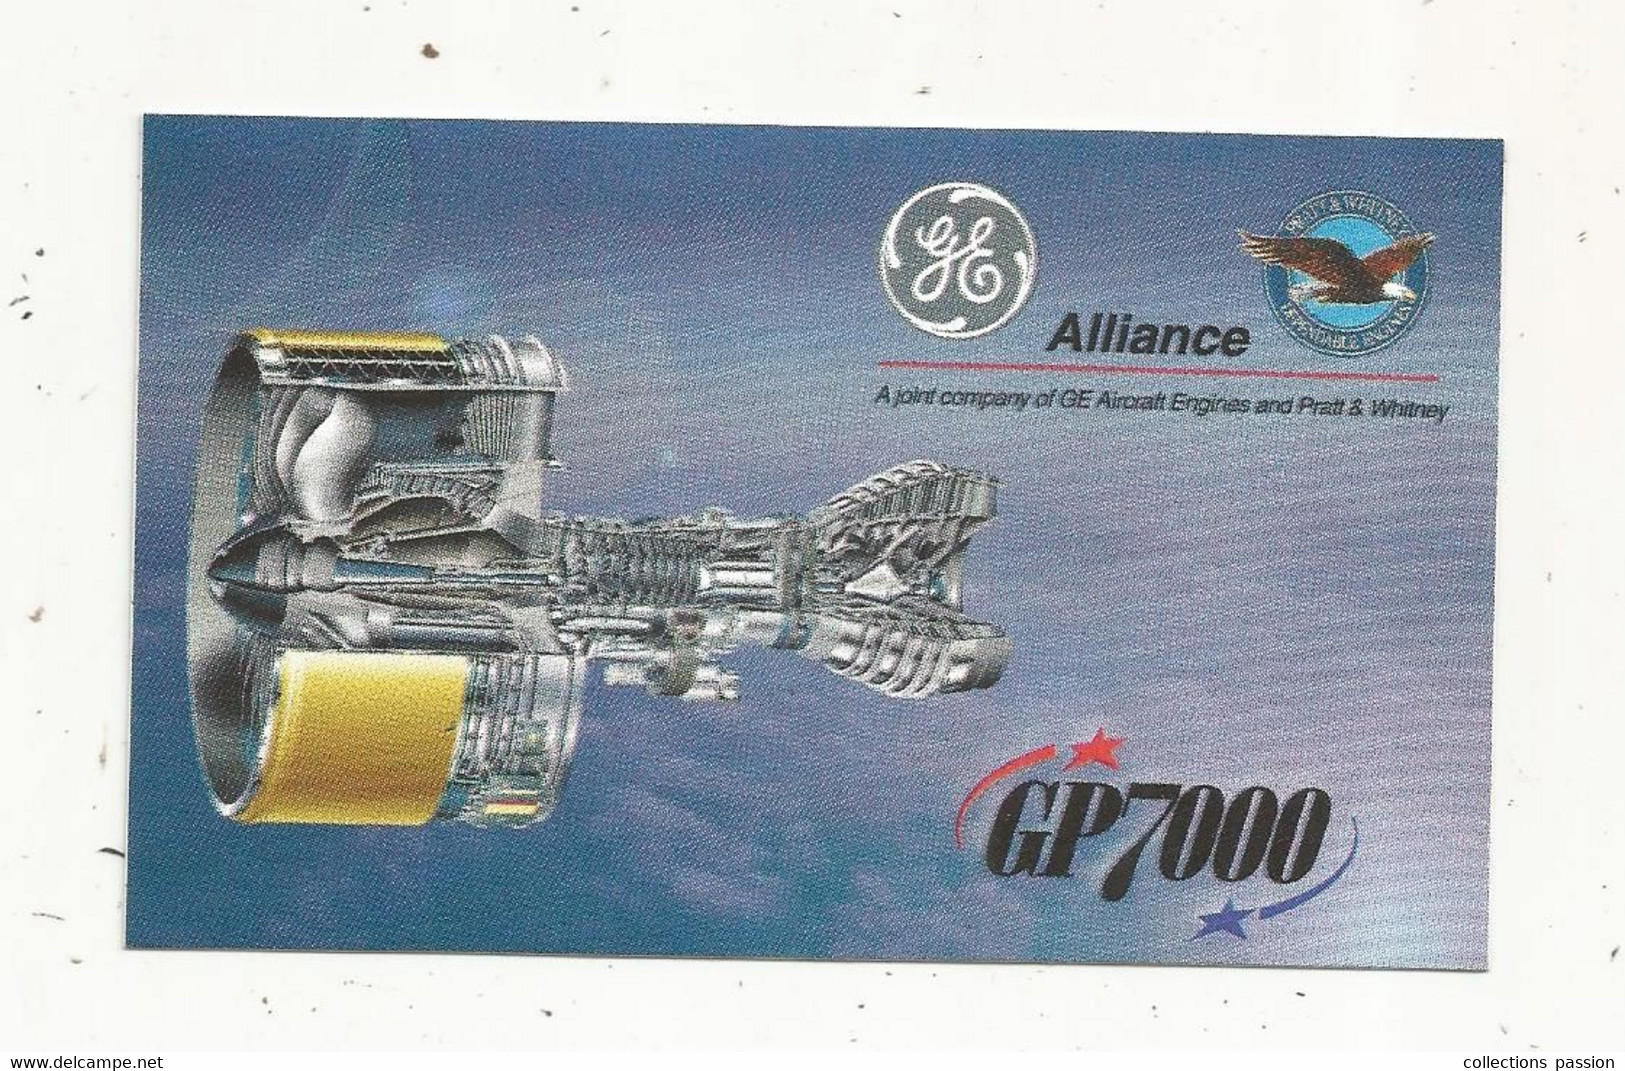 Autocollant, 120 X 75 Mm, AVIATION , Moteur GP7000 ,ALLIANCE : Joint Company Of GE Aircraft Engines And Pratt & Whitney - Pegatinas